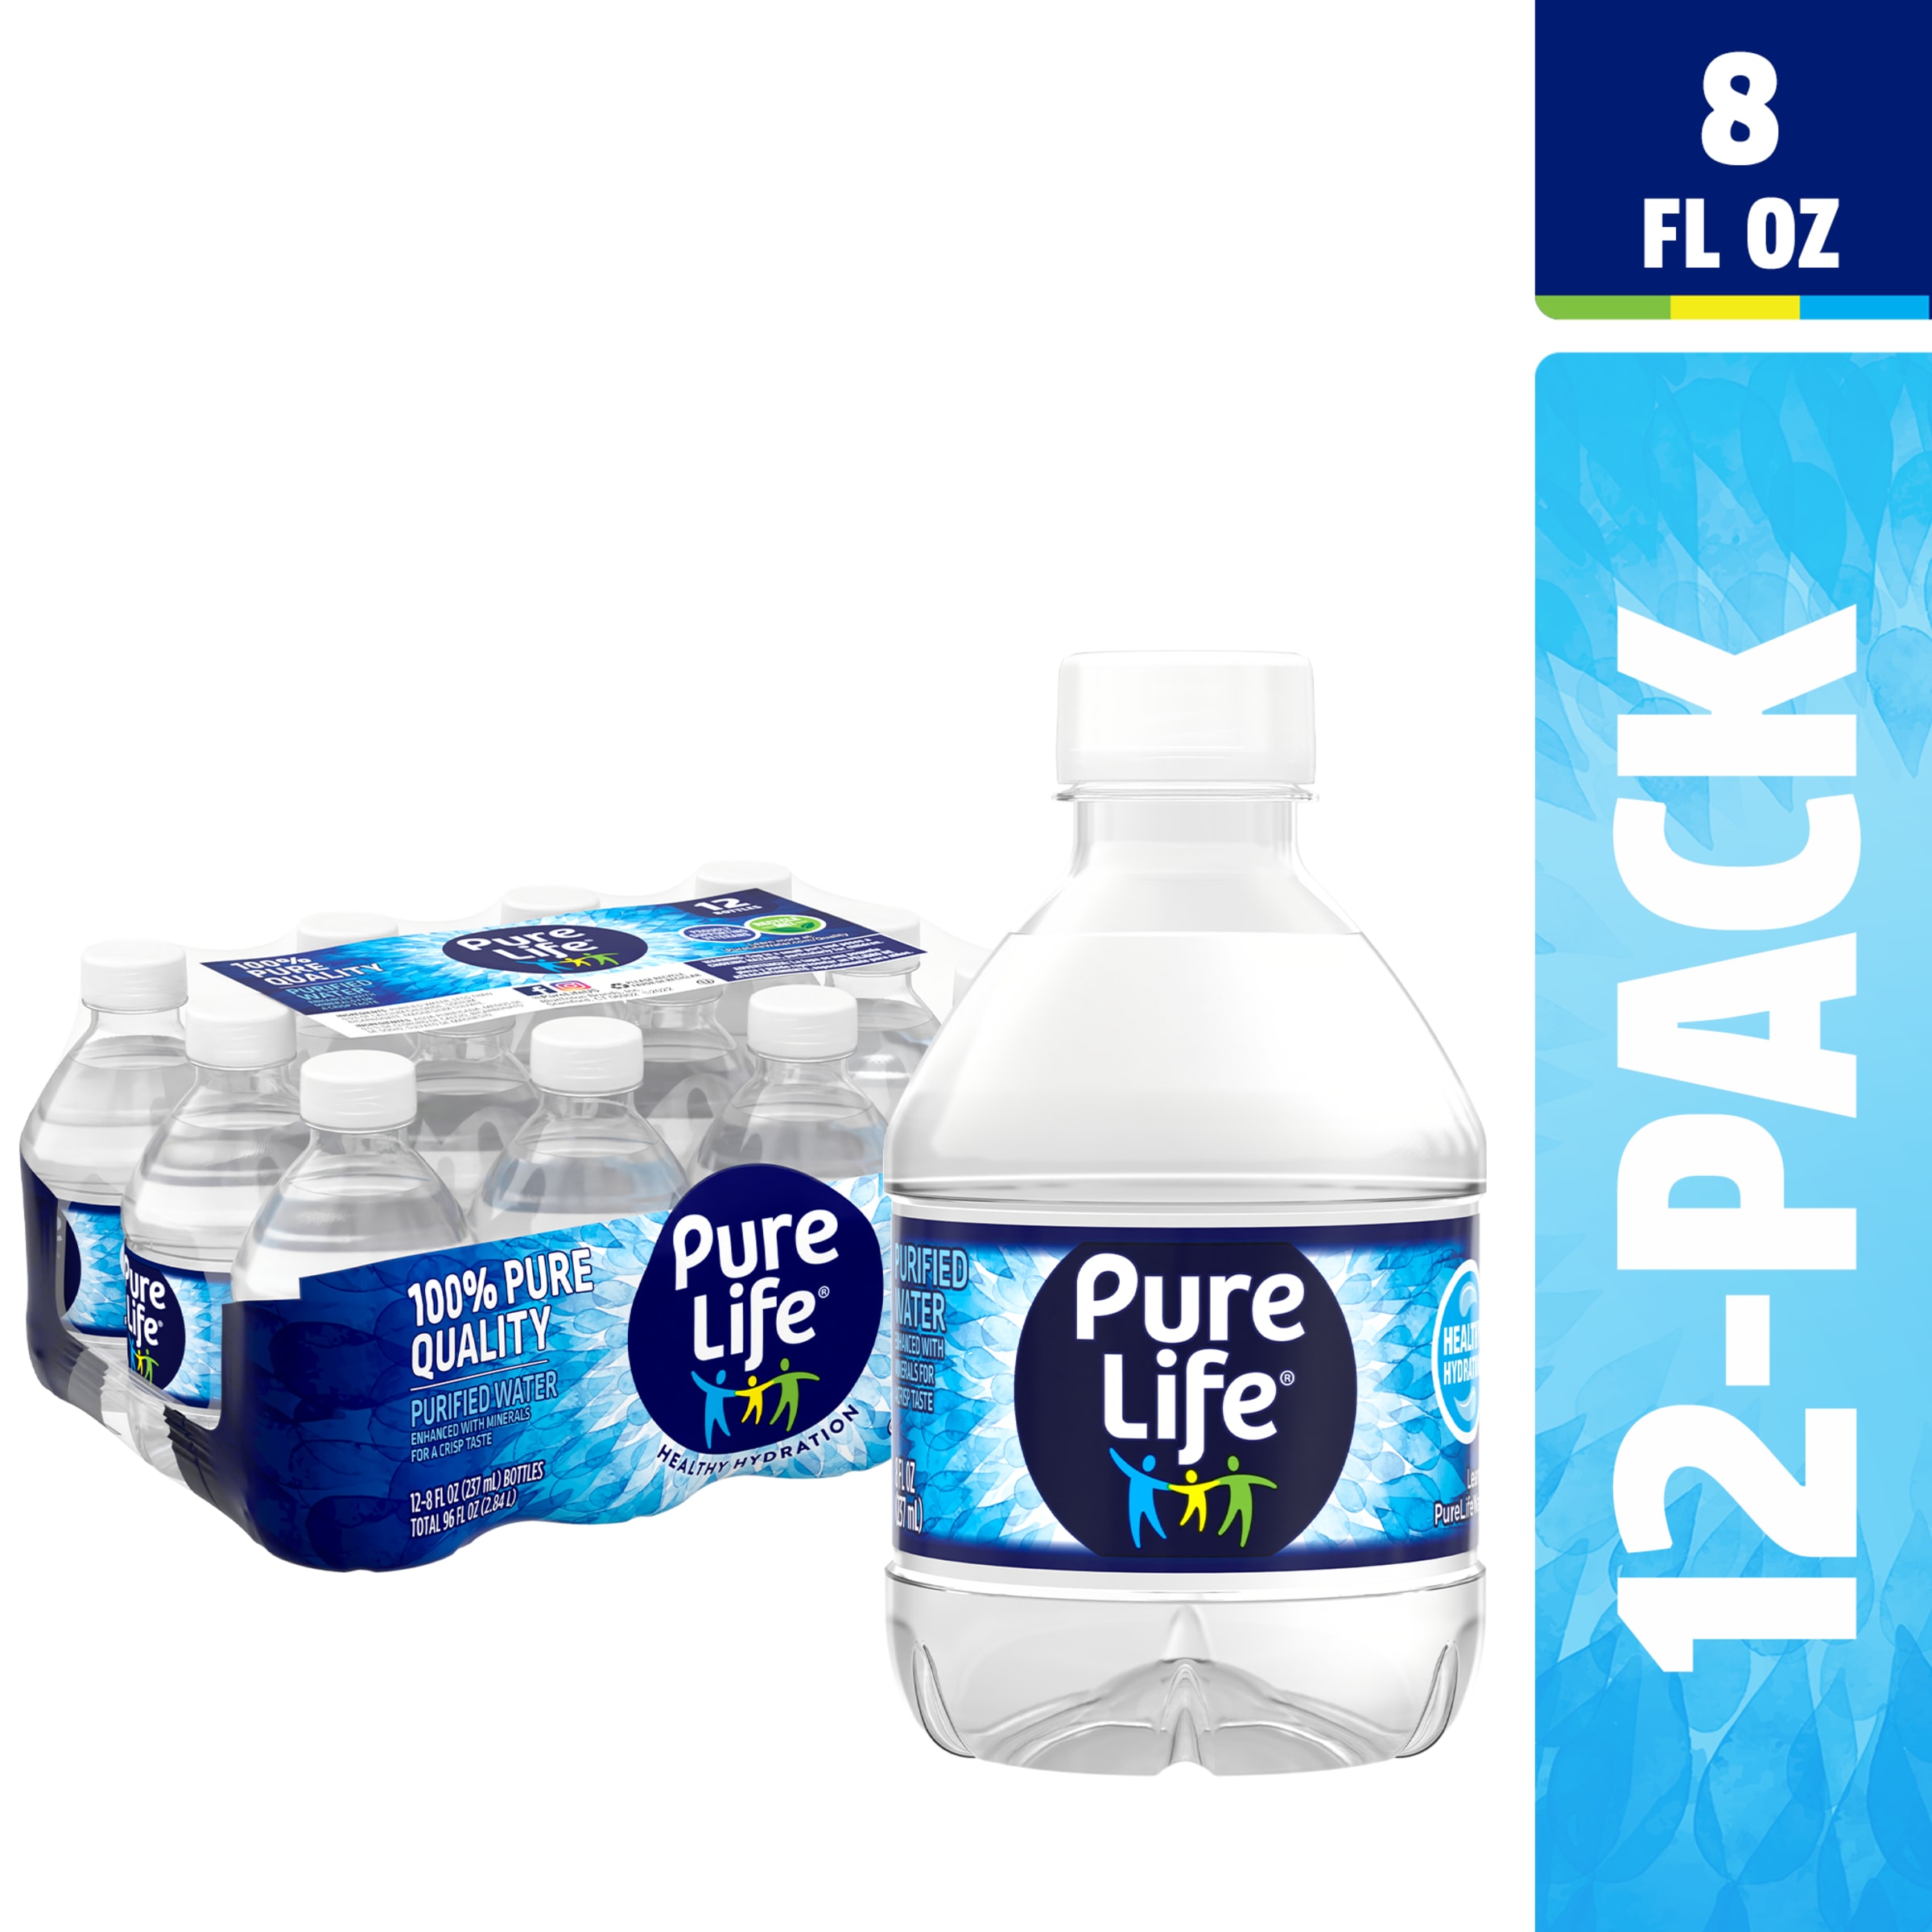 Pure Life Purified Water, 8 Fl Oz, Plastic Bottled Water (12 Pack) - image 1 of 10